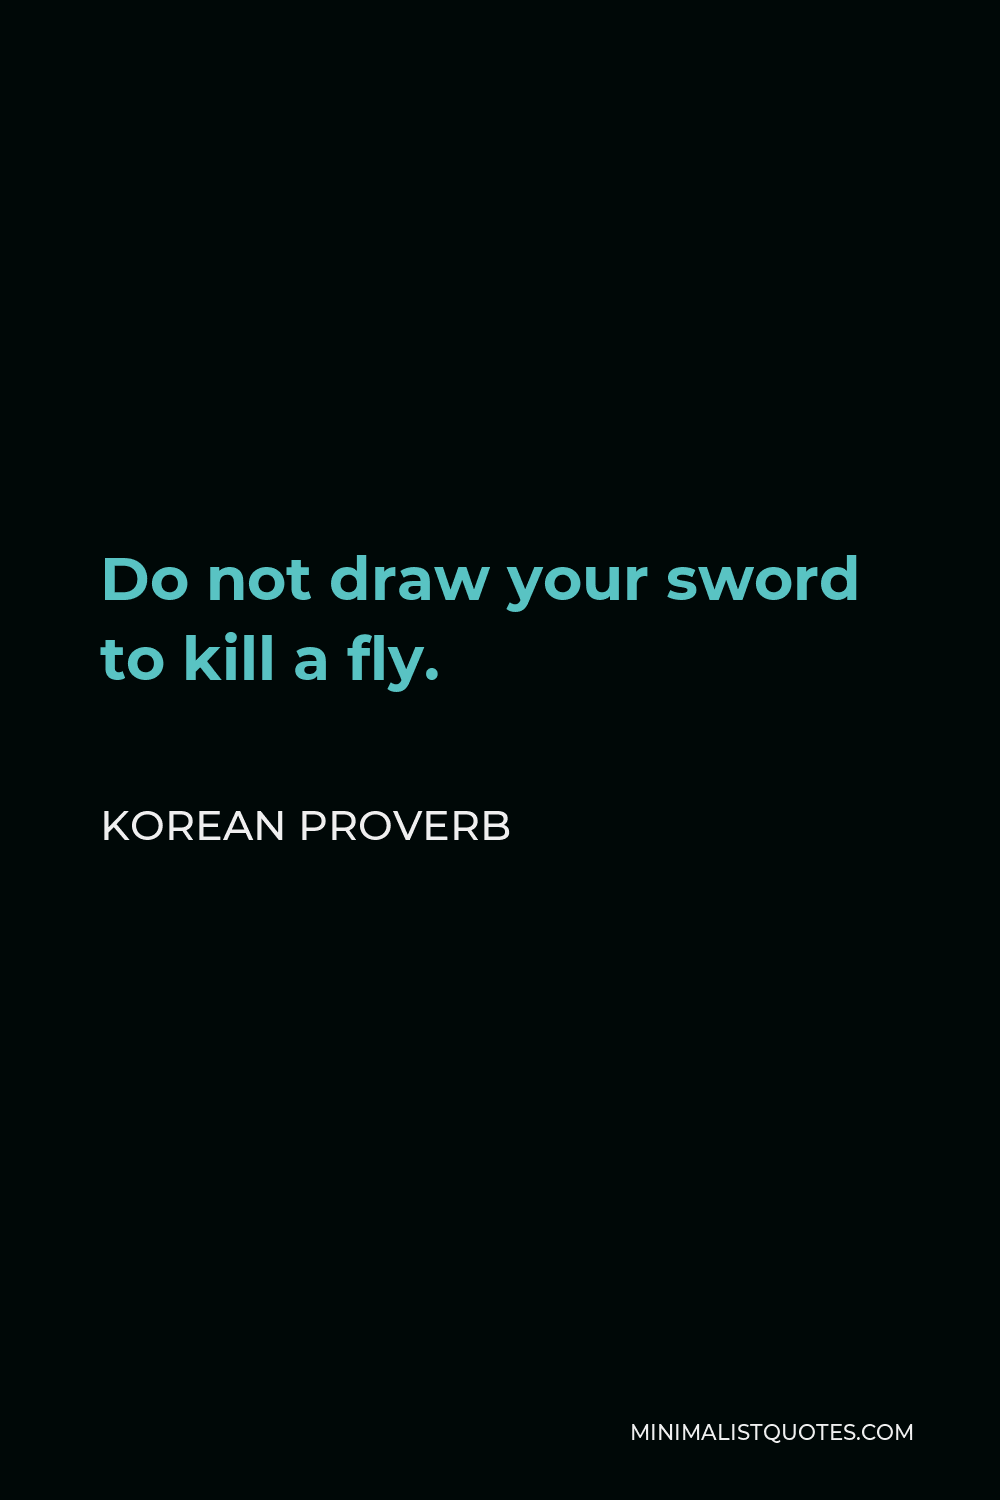 Korean Proverb Quote - Do not draw your sword to kill a fly.